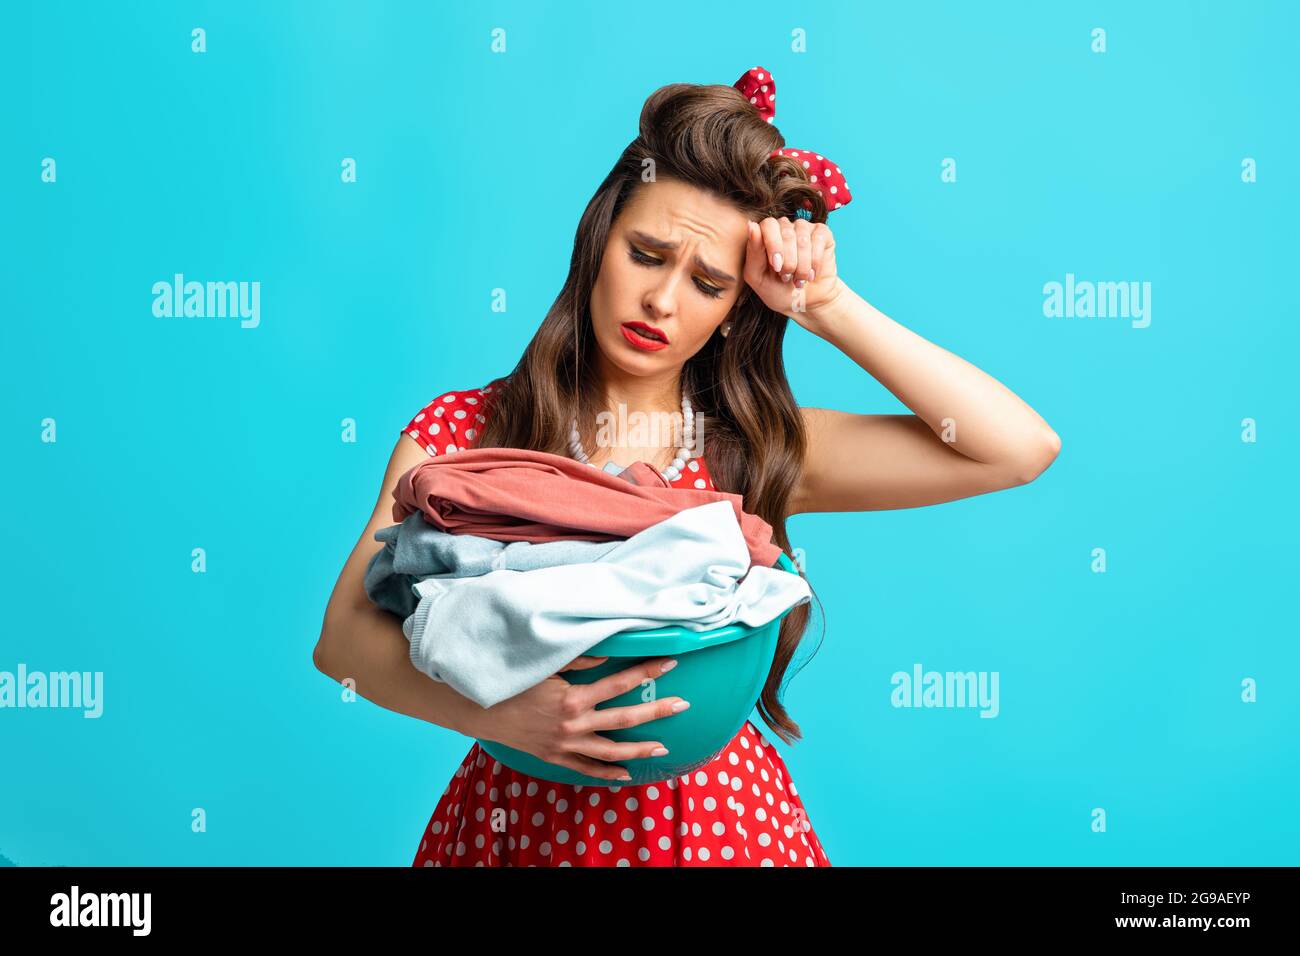 Sad exhausted pinup woman in retro outfit holding clothes for washing or ironing on blue studio background Stock Photo